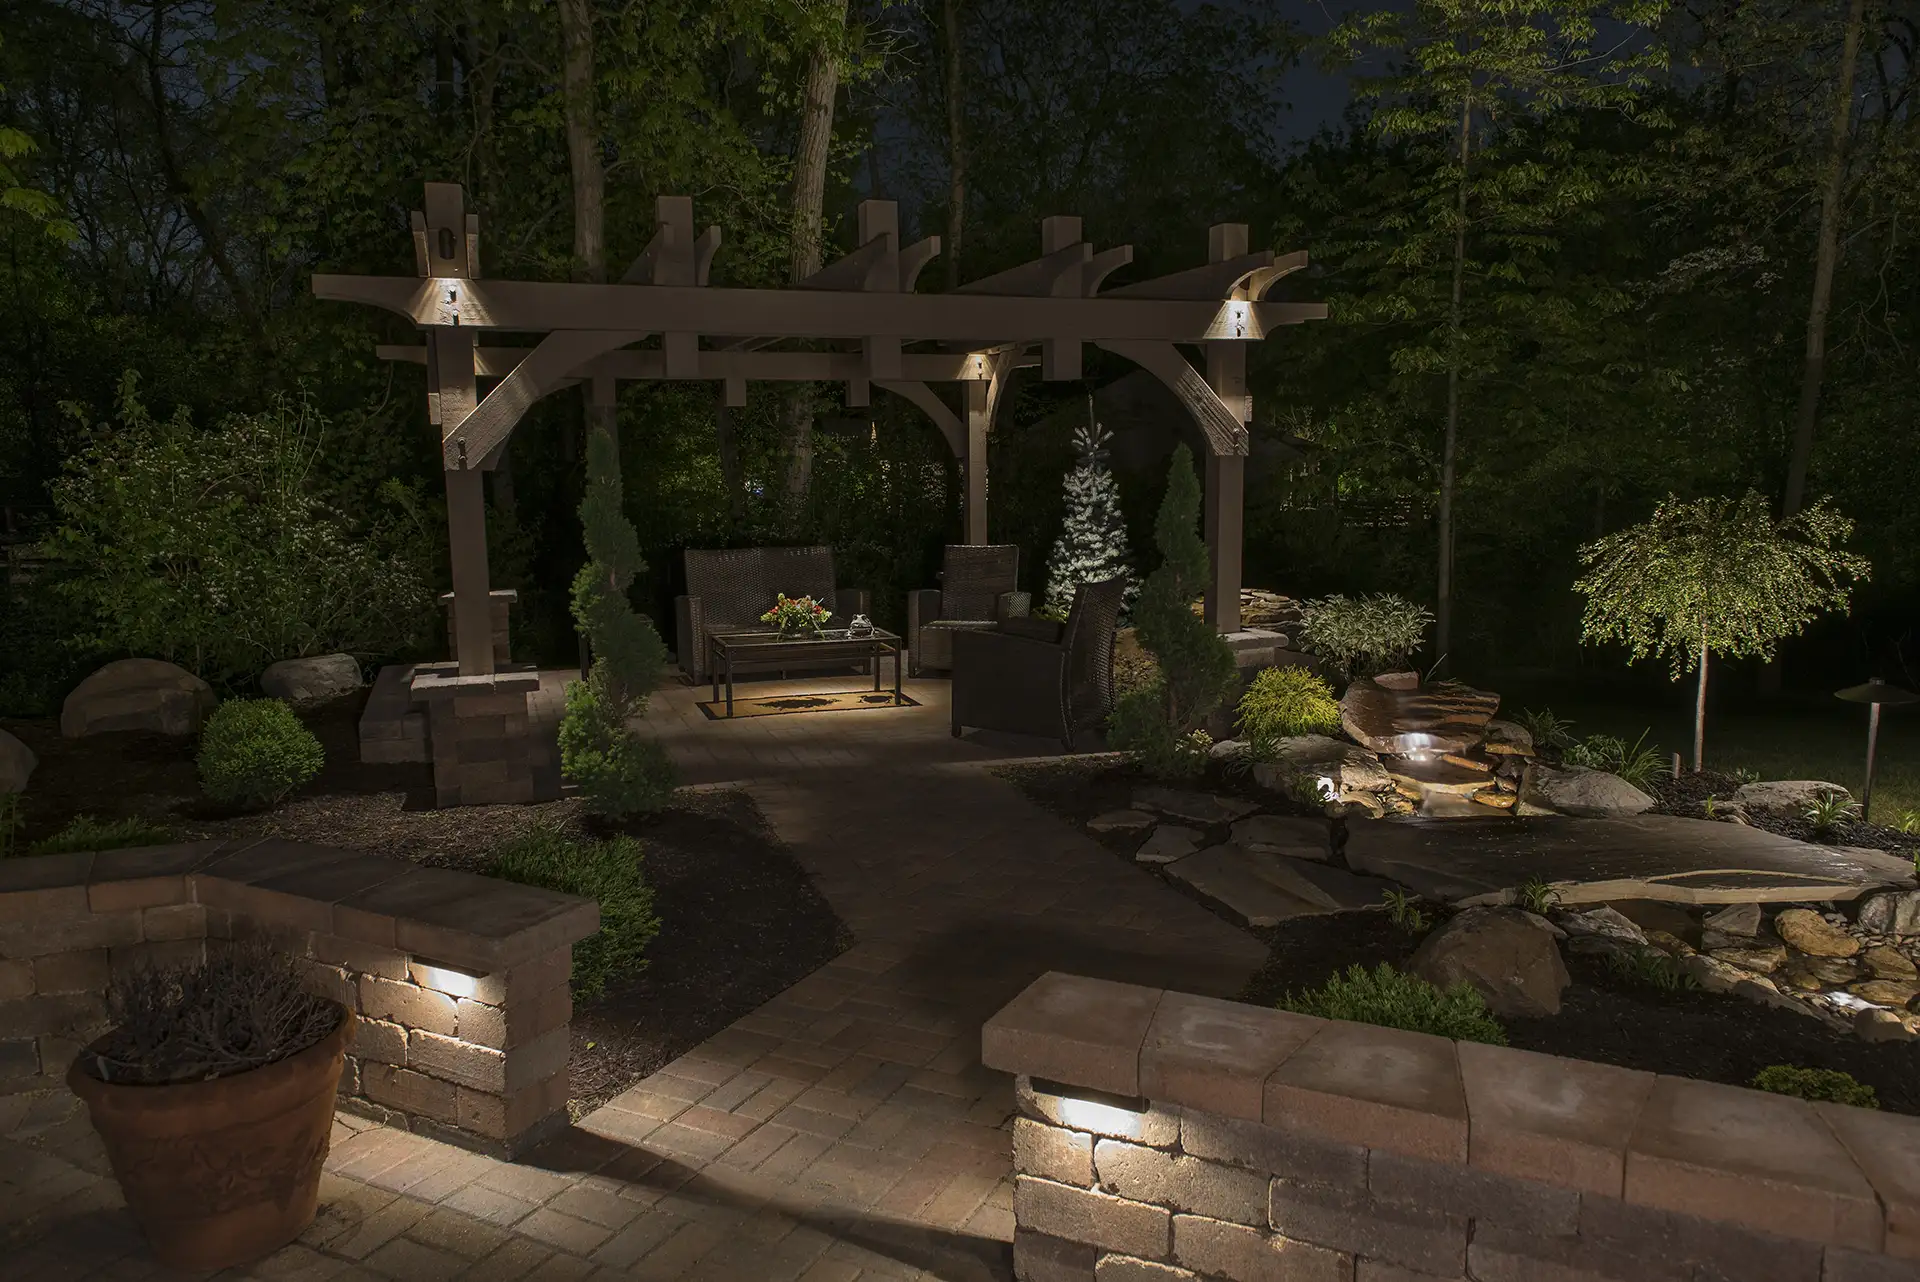 Darnell Dr image 1 pergola patio seating area Lighthouse Outdoor Lighting and Audio Delaware